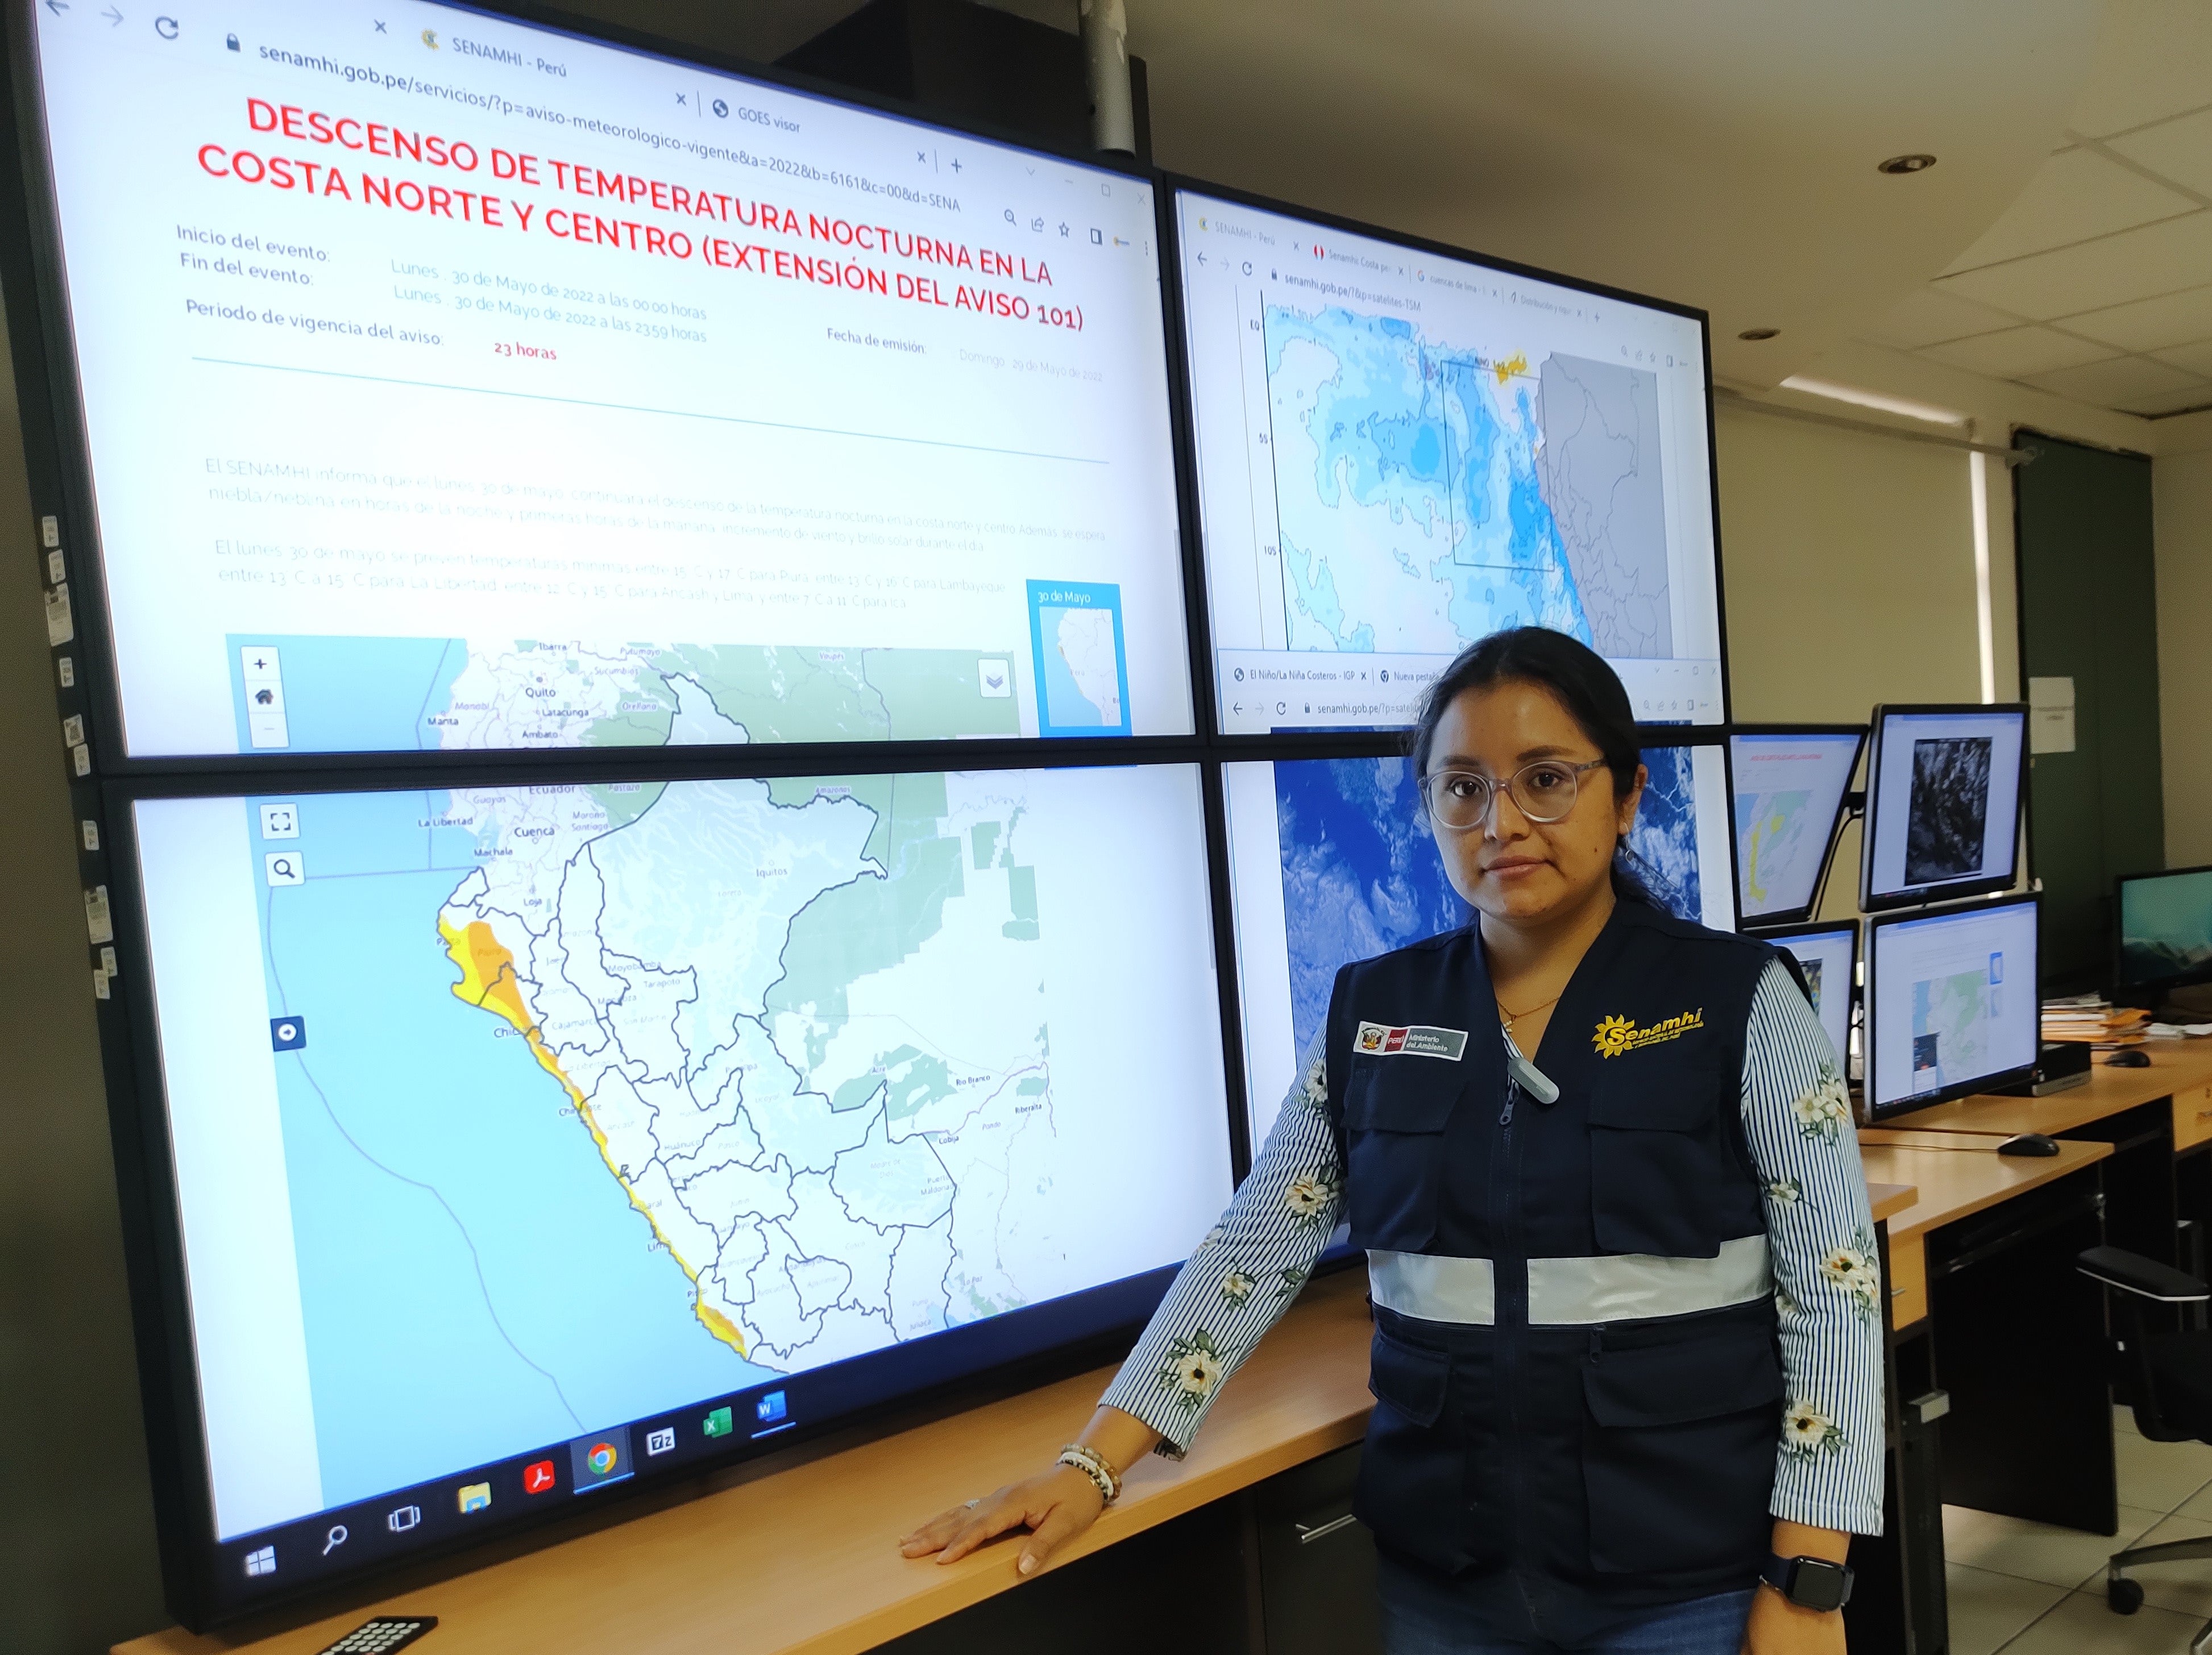 Vannia Aliaga, an analyst at the National Meteorological and Hydrological Service of Peru